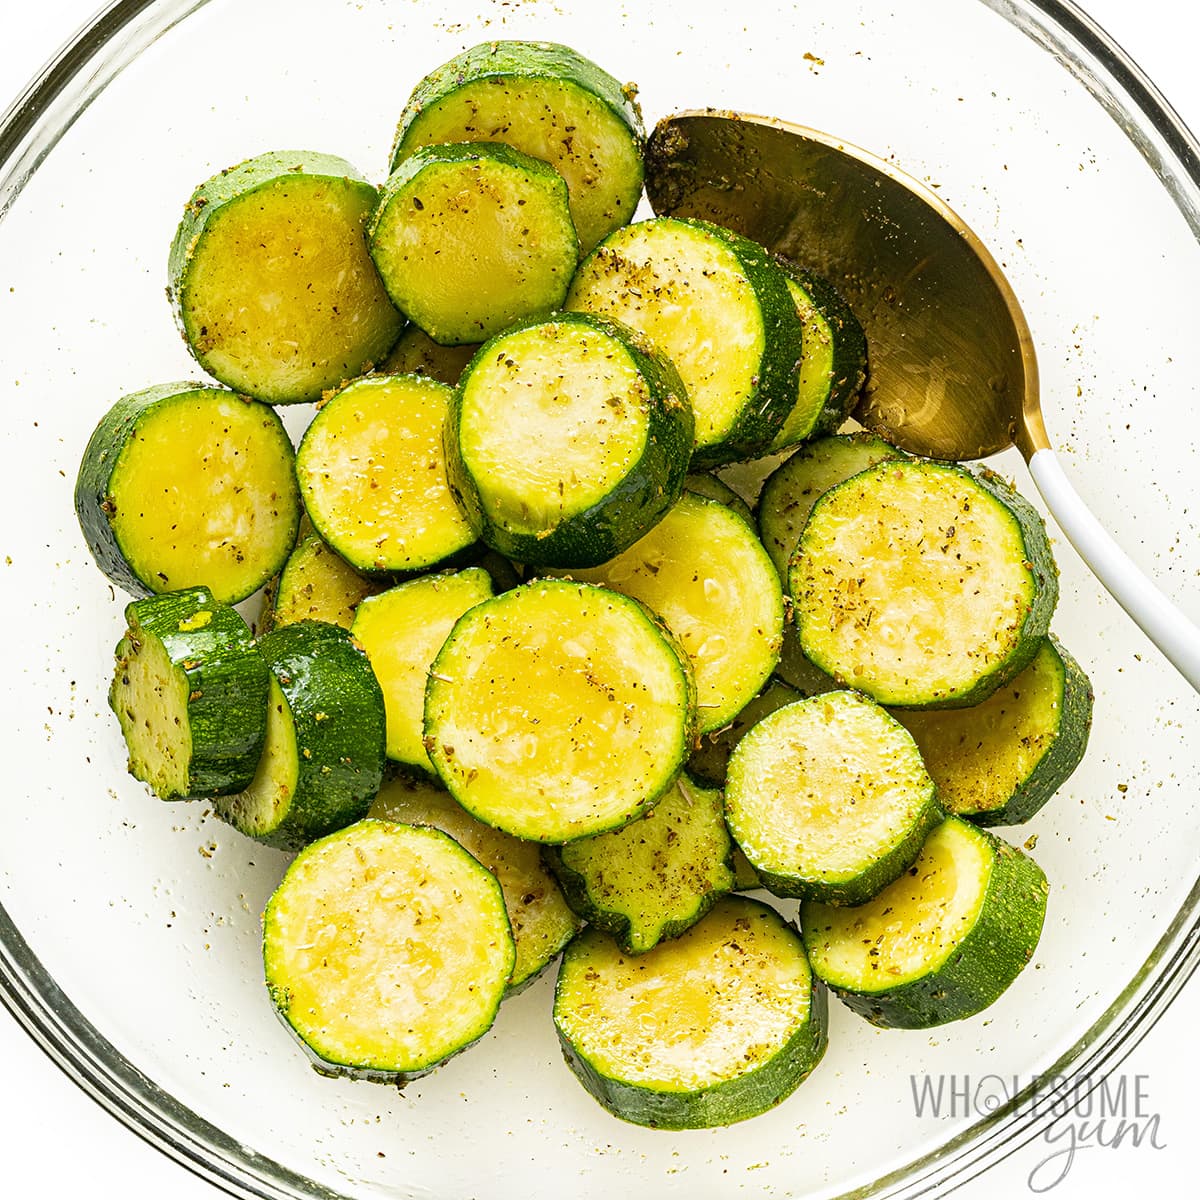 Zucchini seasoned with spices and tossed in a bowl.